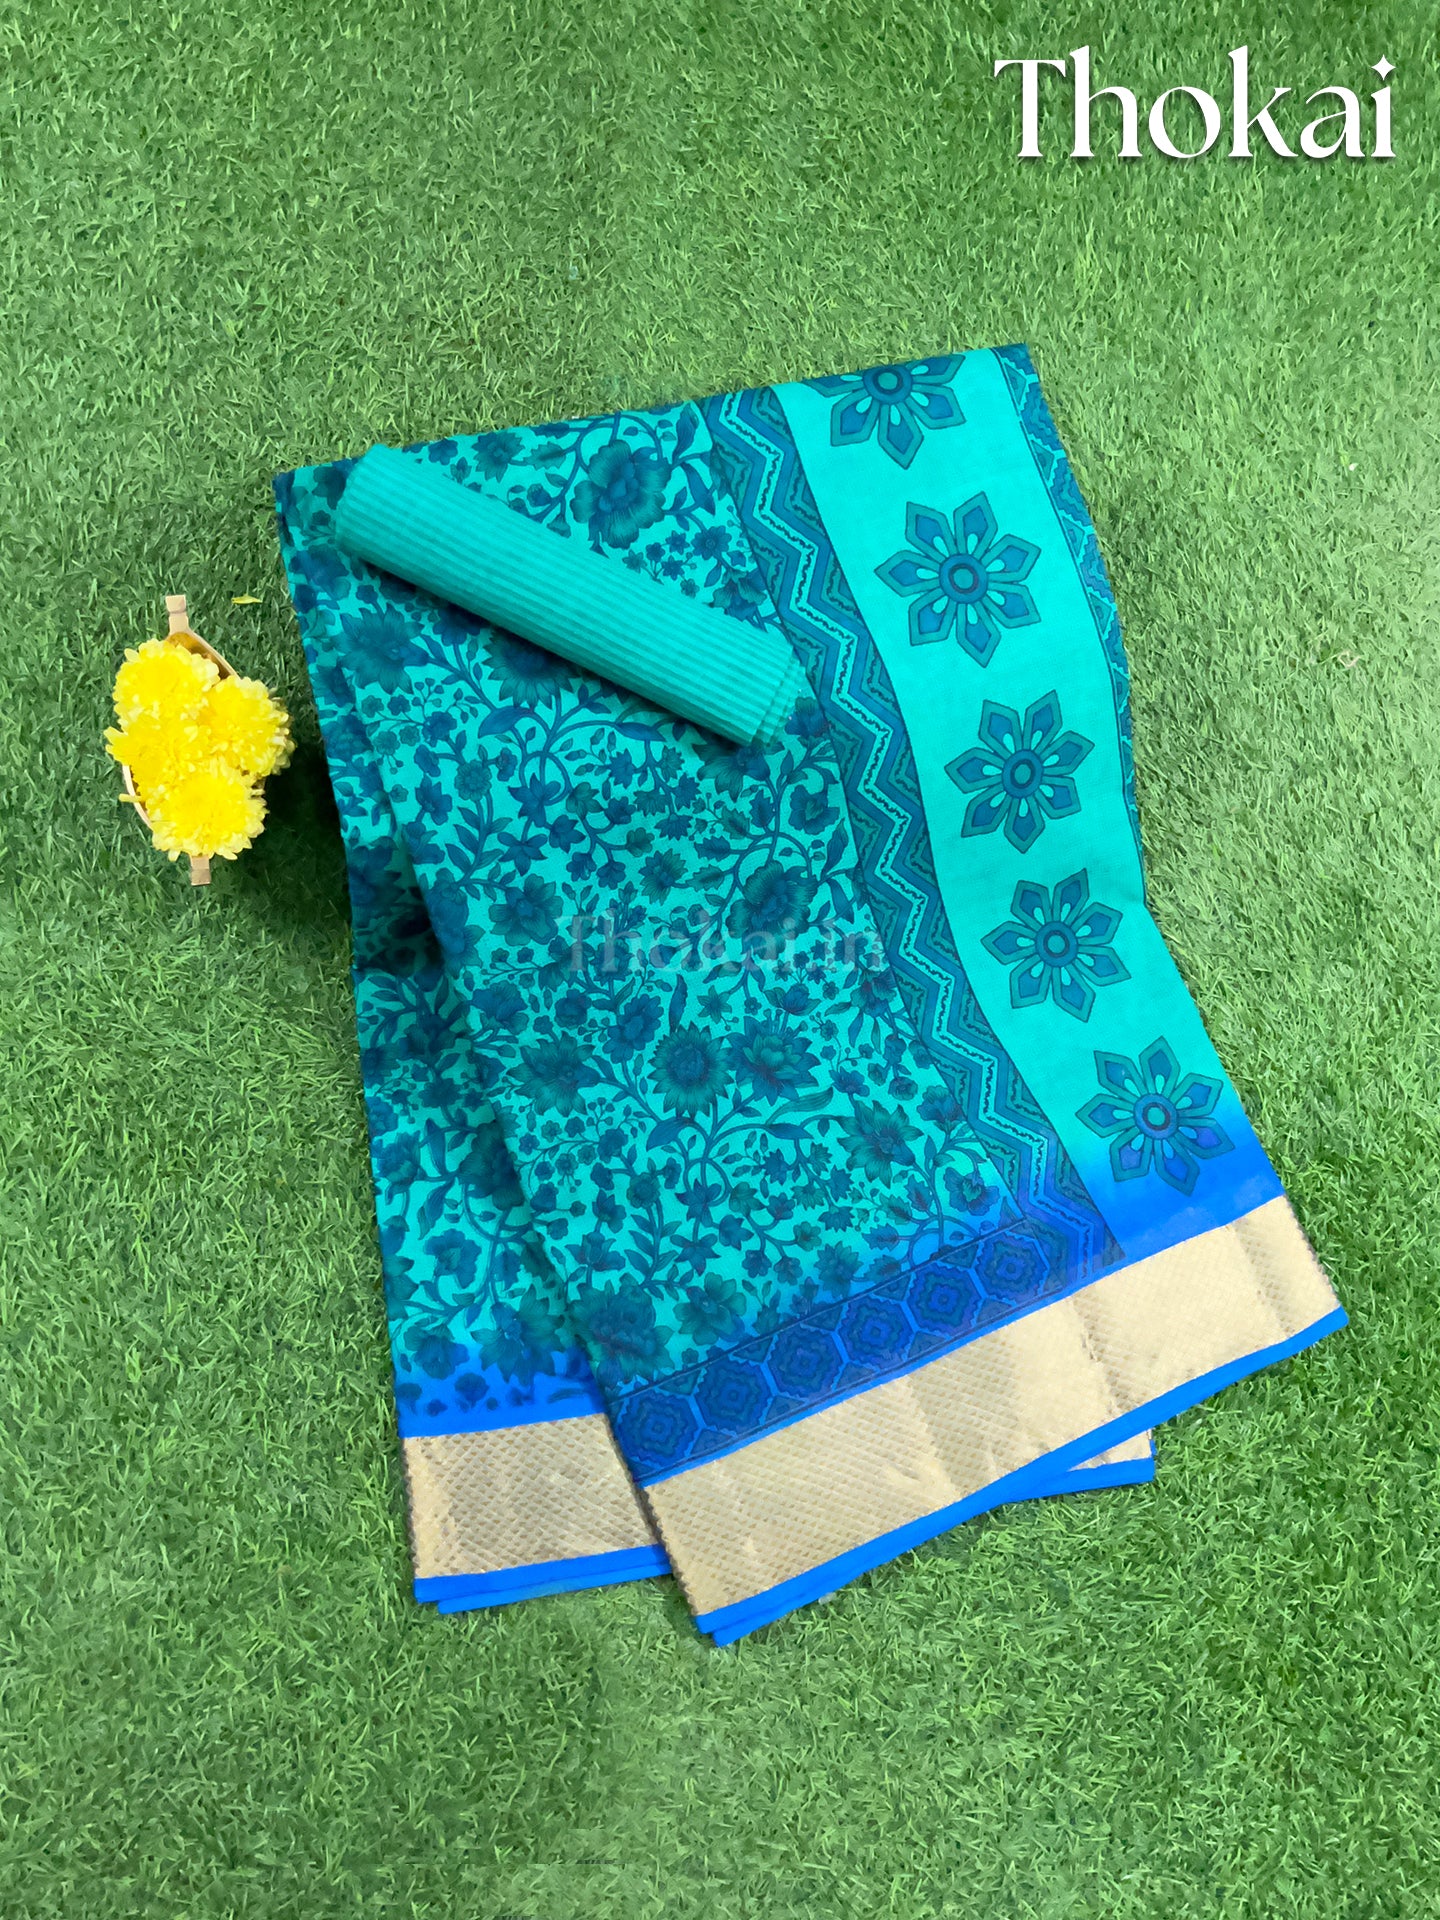 Turquoise and blue printed cotton saree